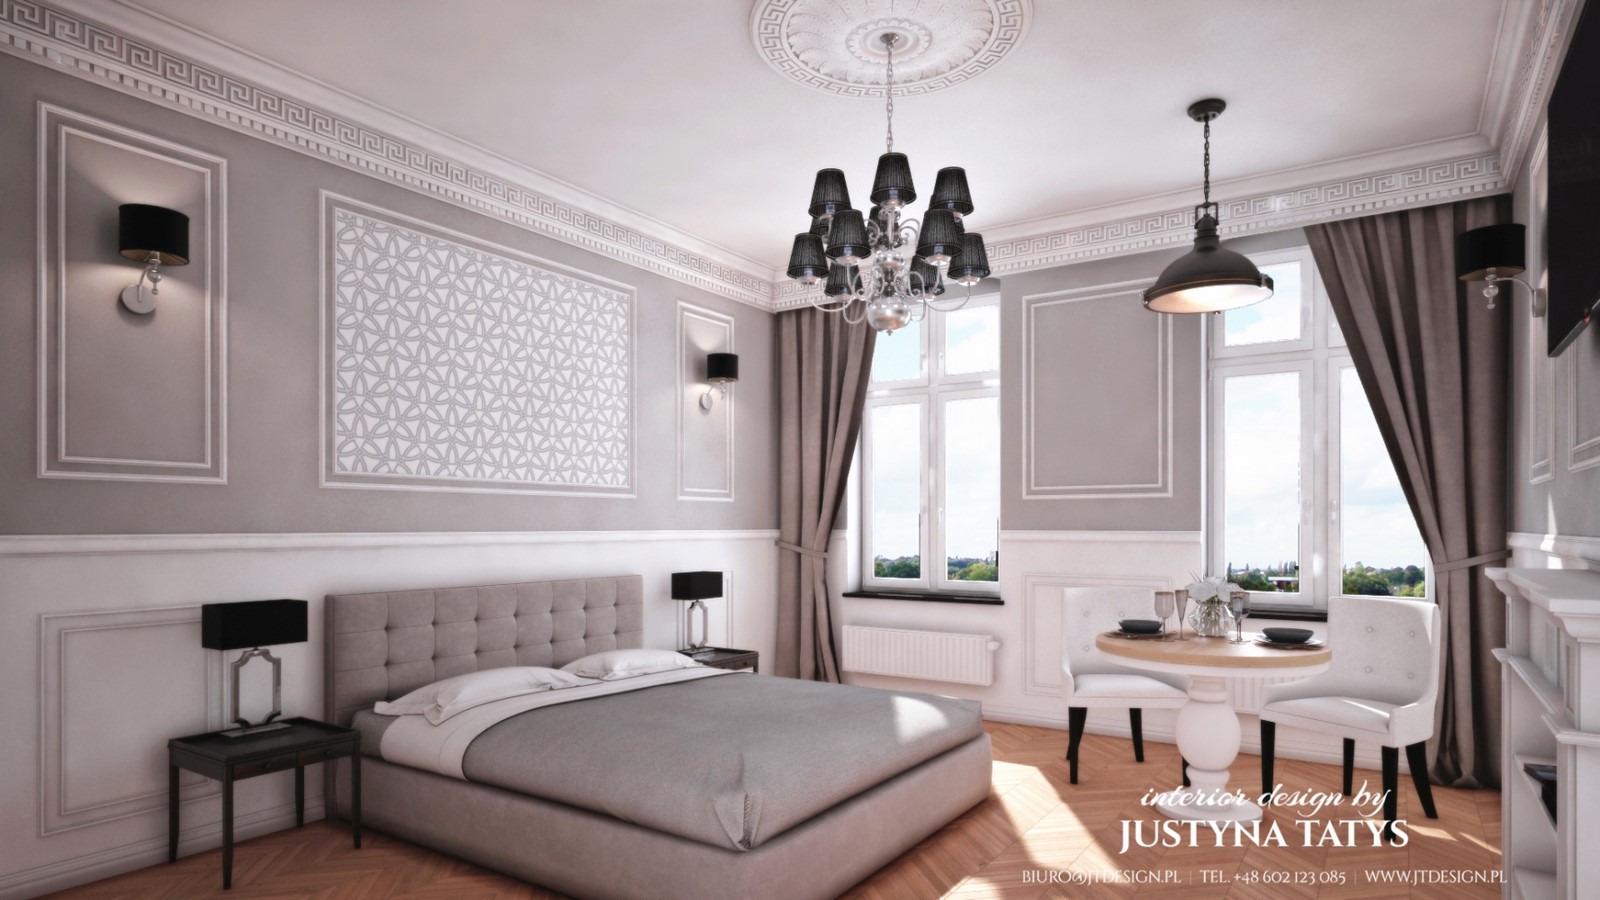 Interior Designers in Wroclaw - Top 30 Interior Designers in Wroclaw - Sheet8